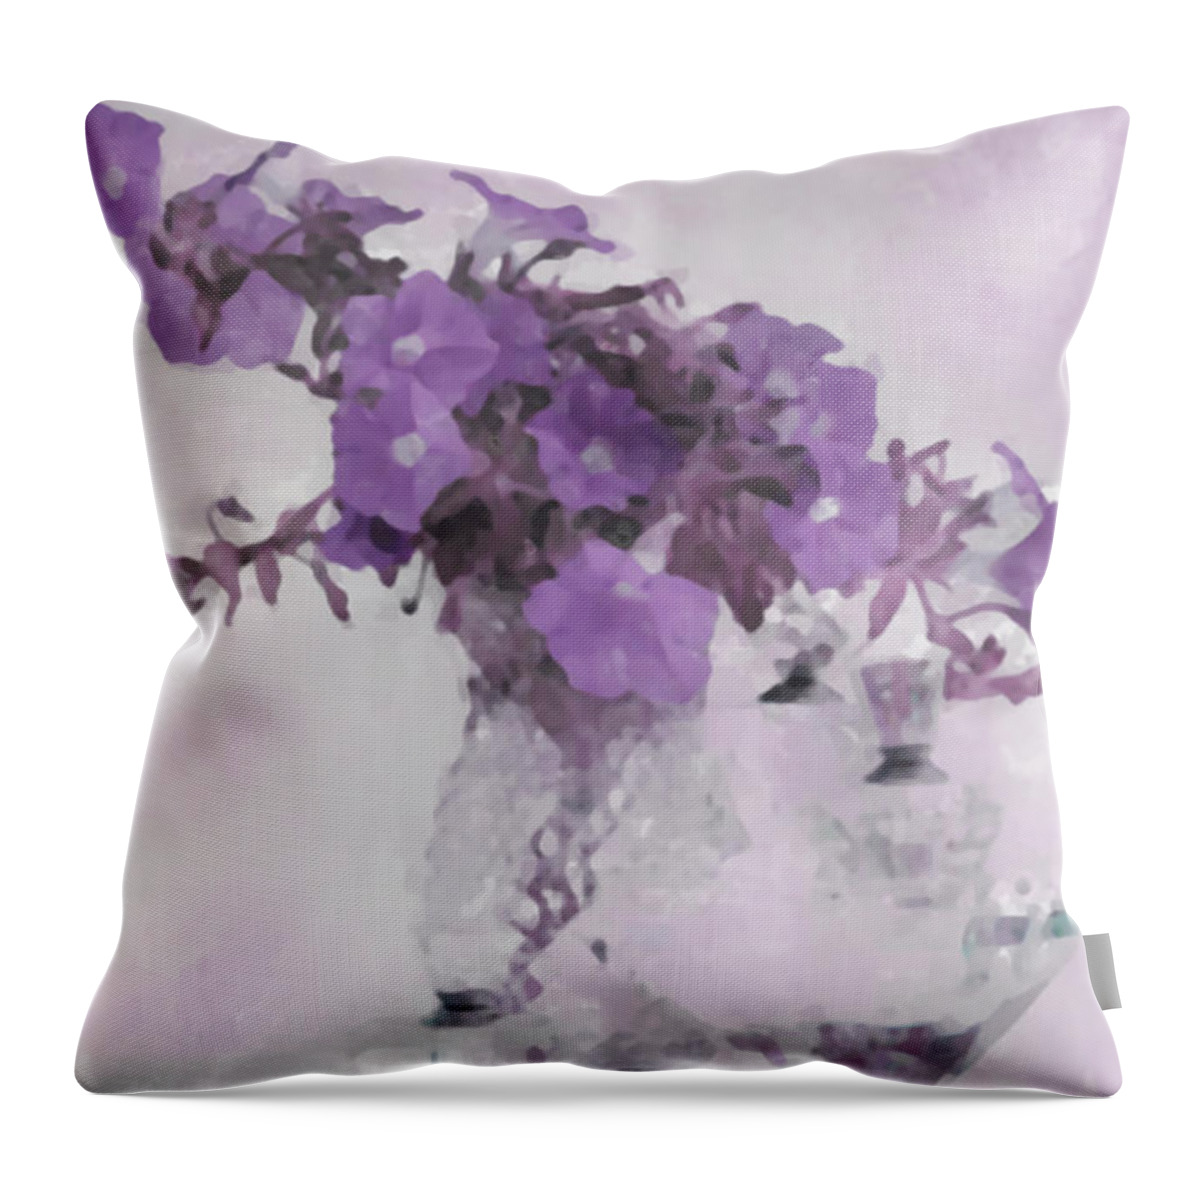 Petunias Throw Pillow featuring the photograph The Broken Branch - Digital Watercolor by Sandra Foster